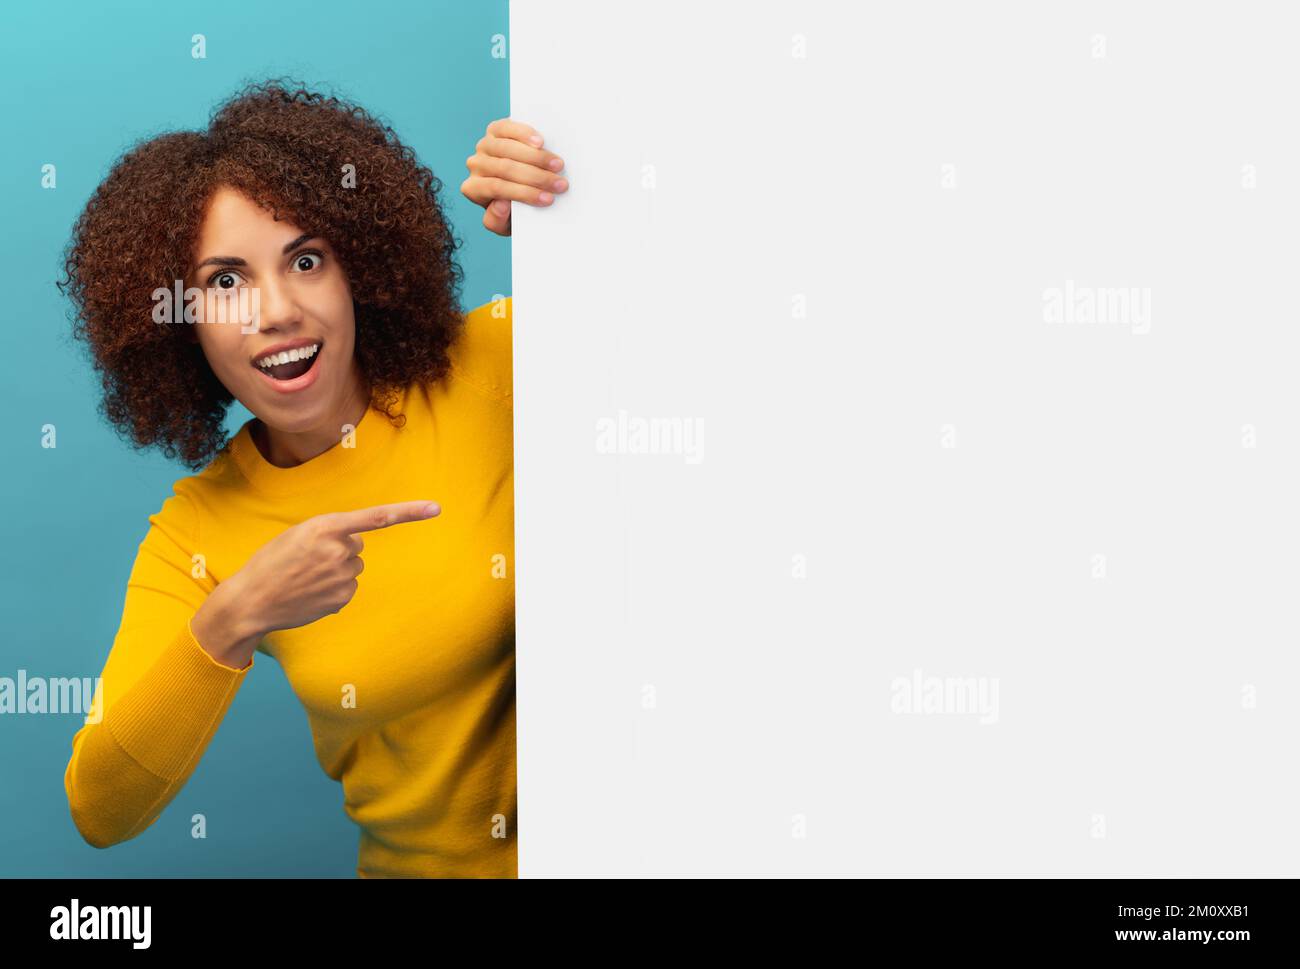 Discount black friday or sale african american woman peeking out from empty white board and pointing her finger Stock Photo